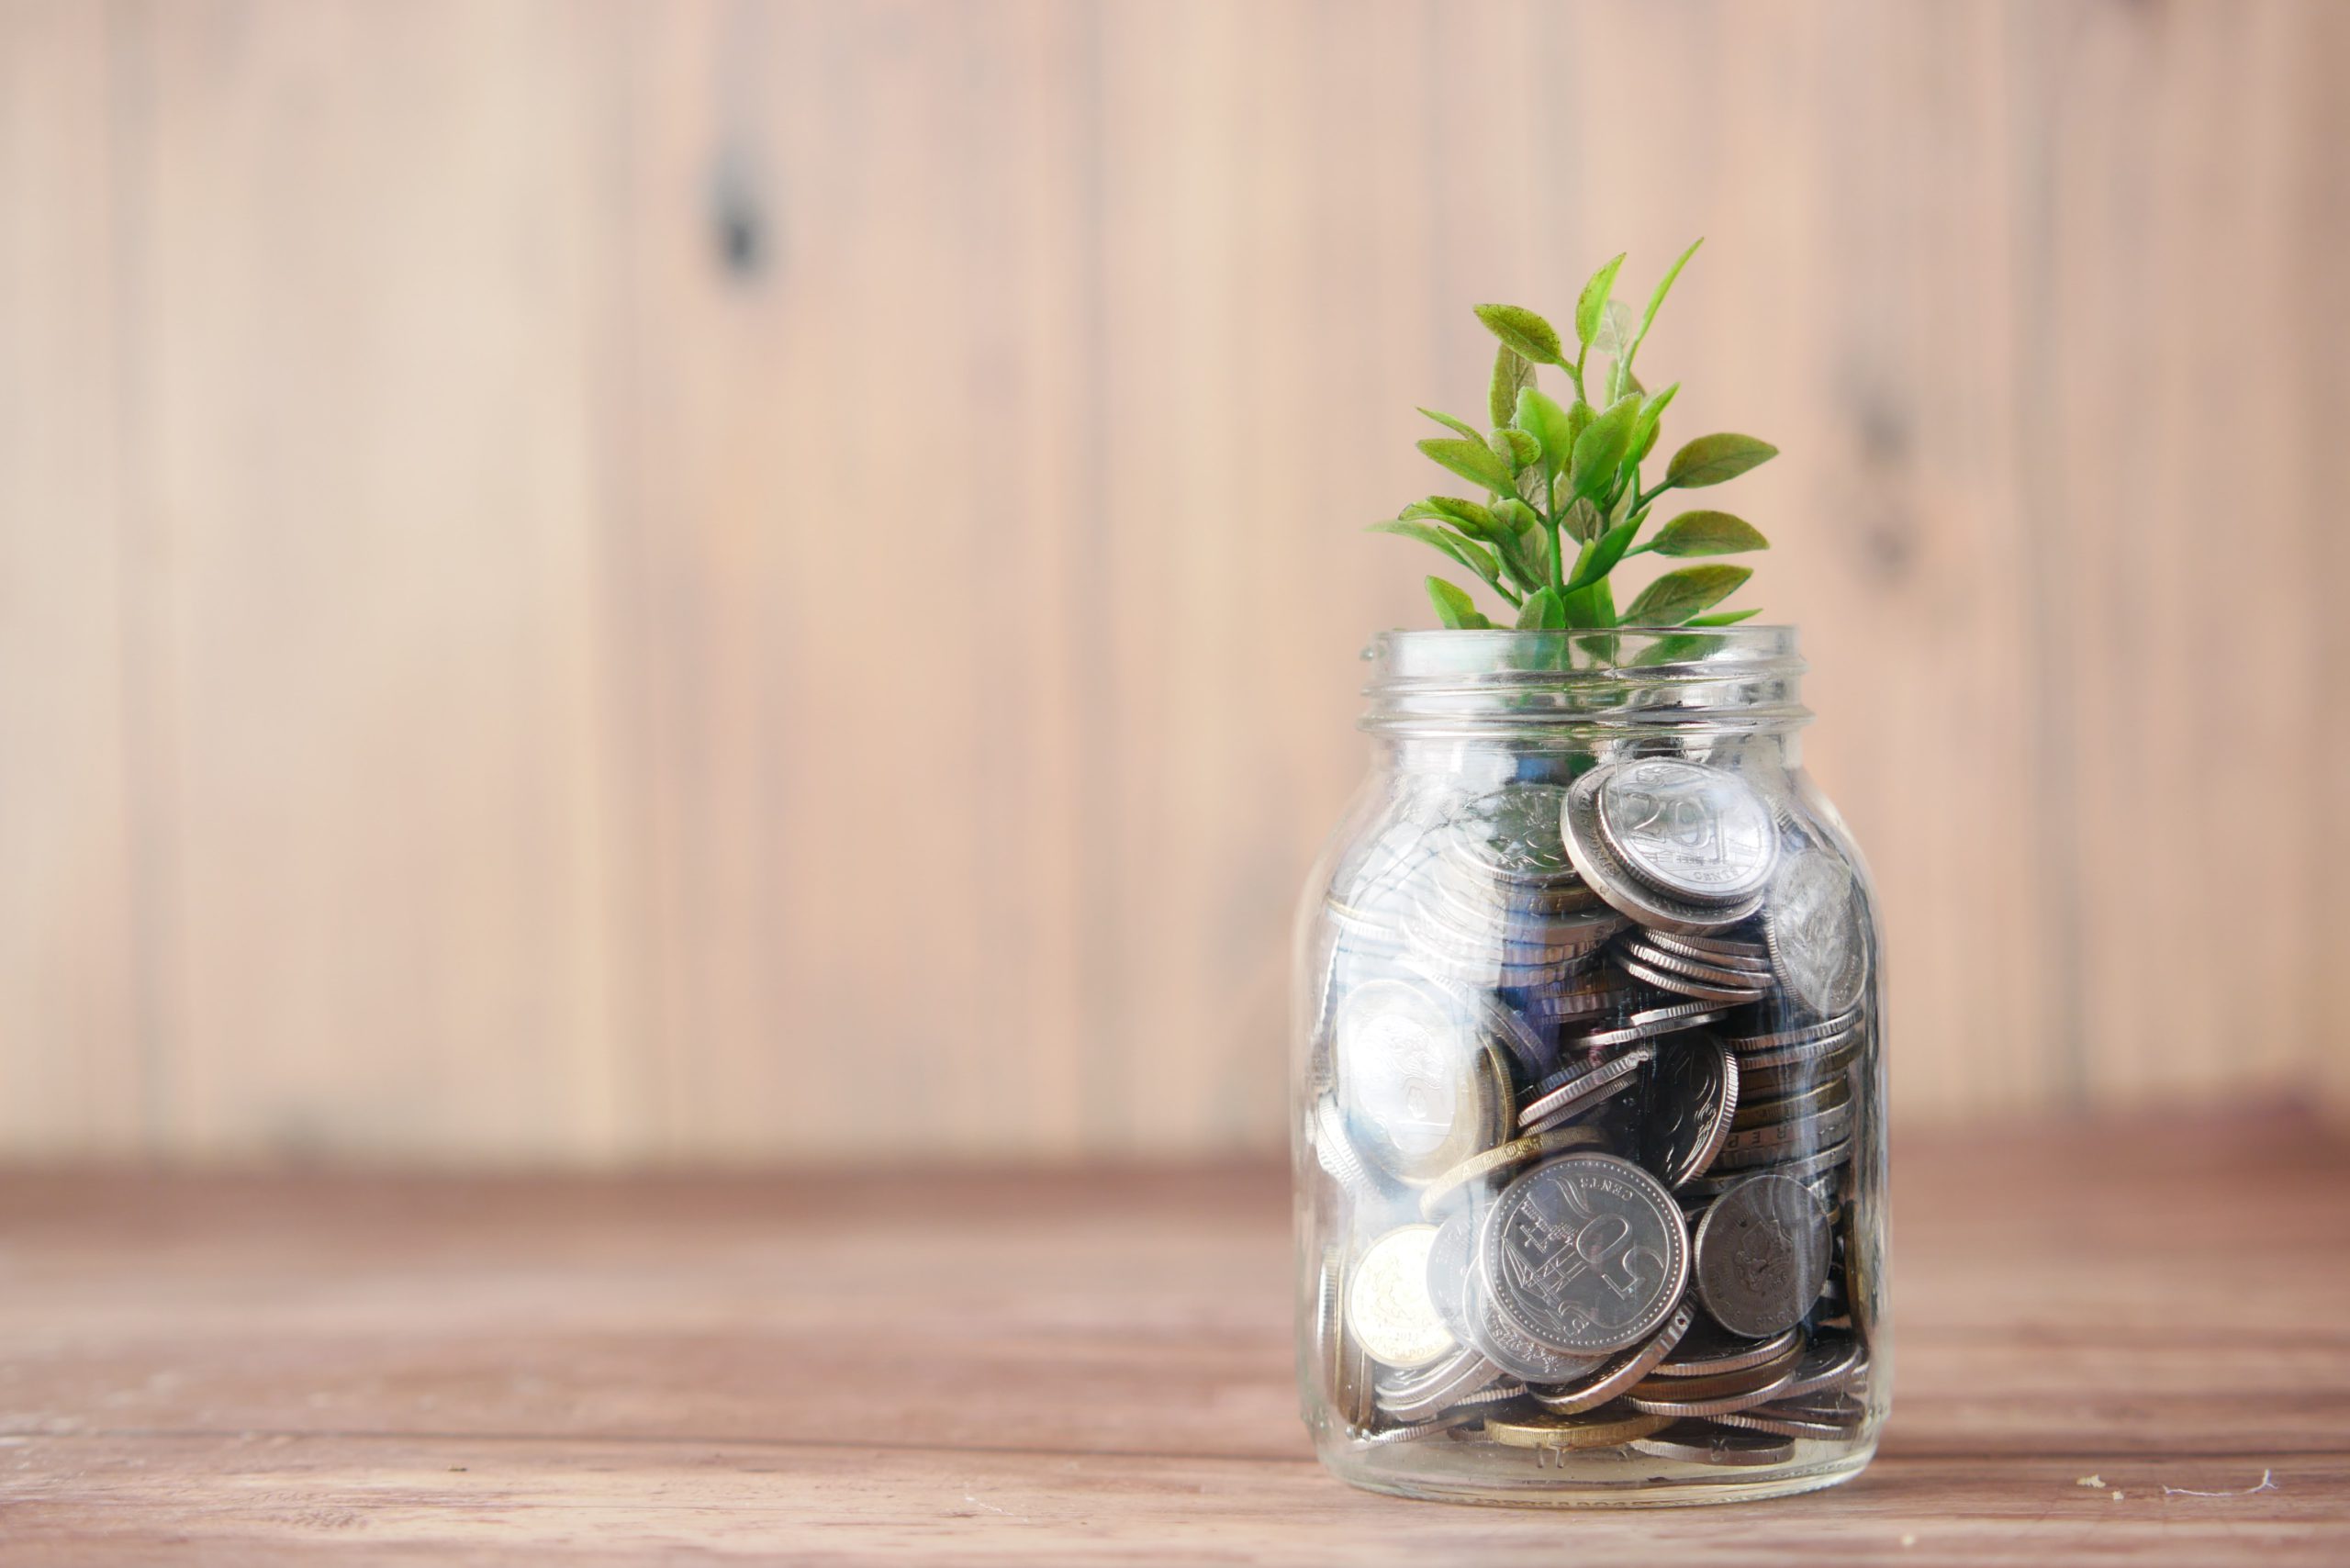 Jar with plant and money to symbolize farm application development costs